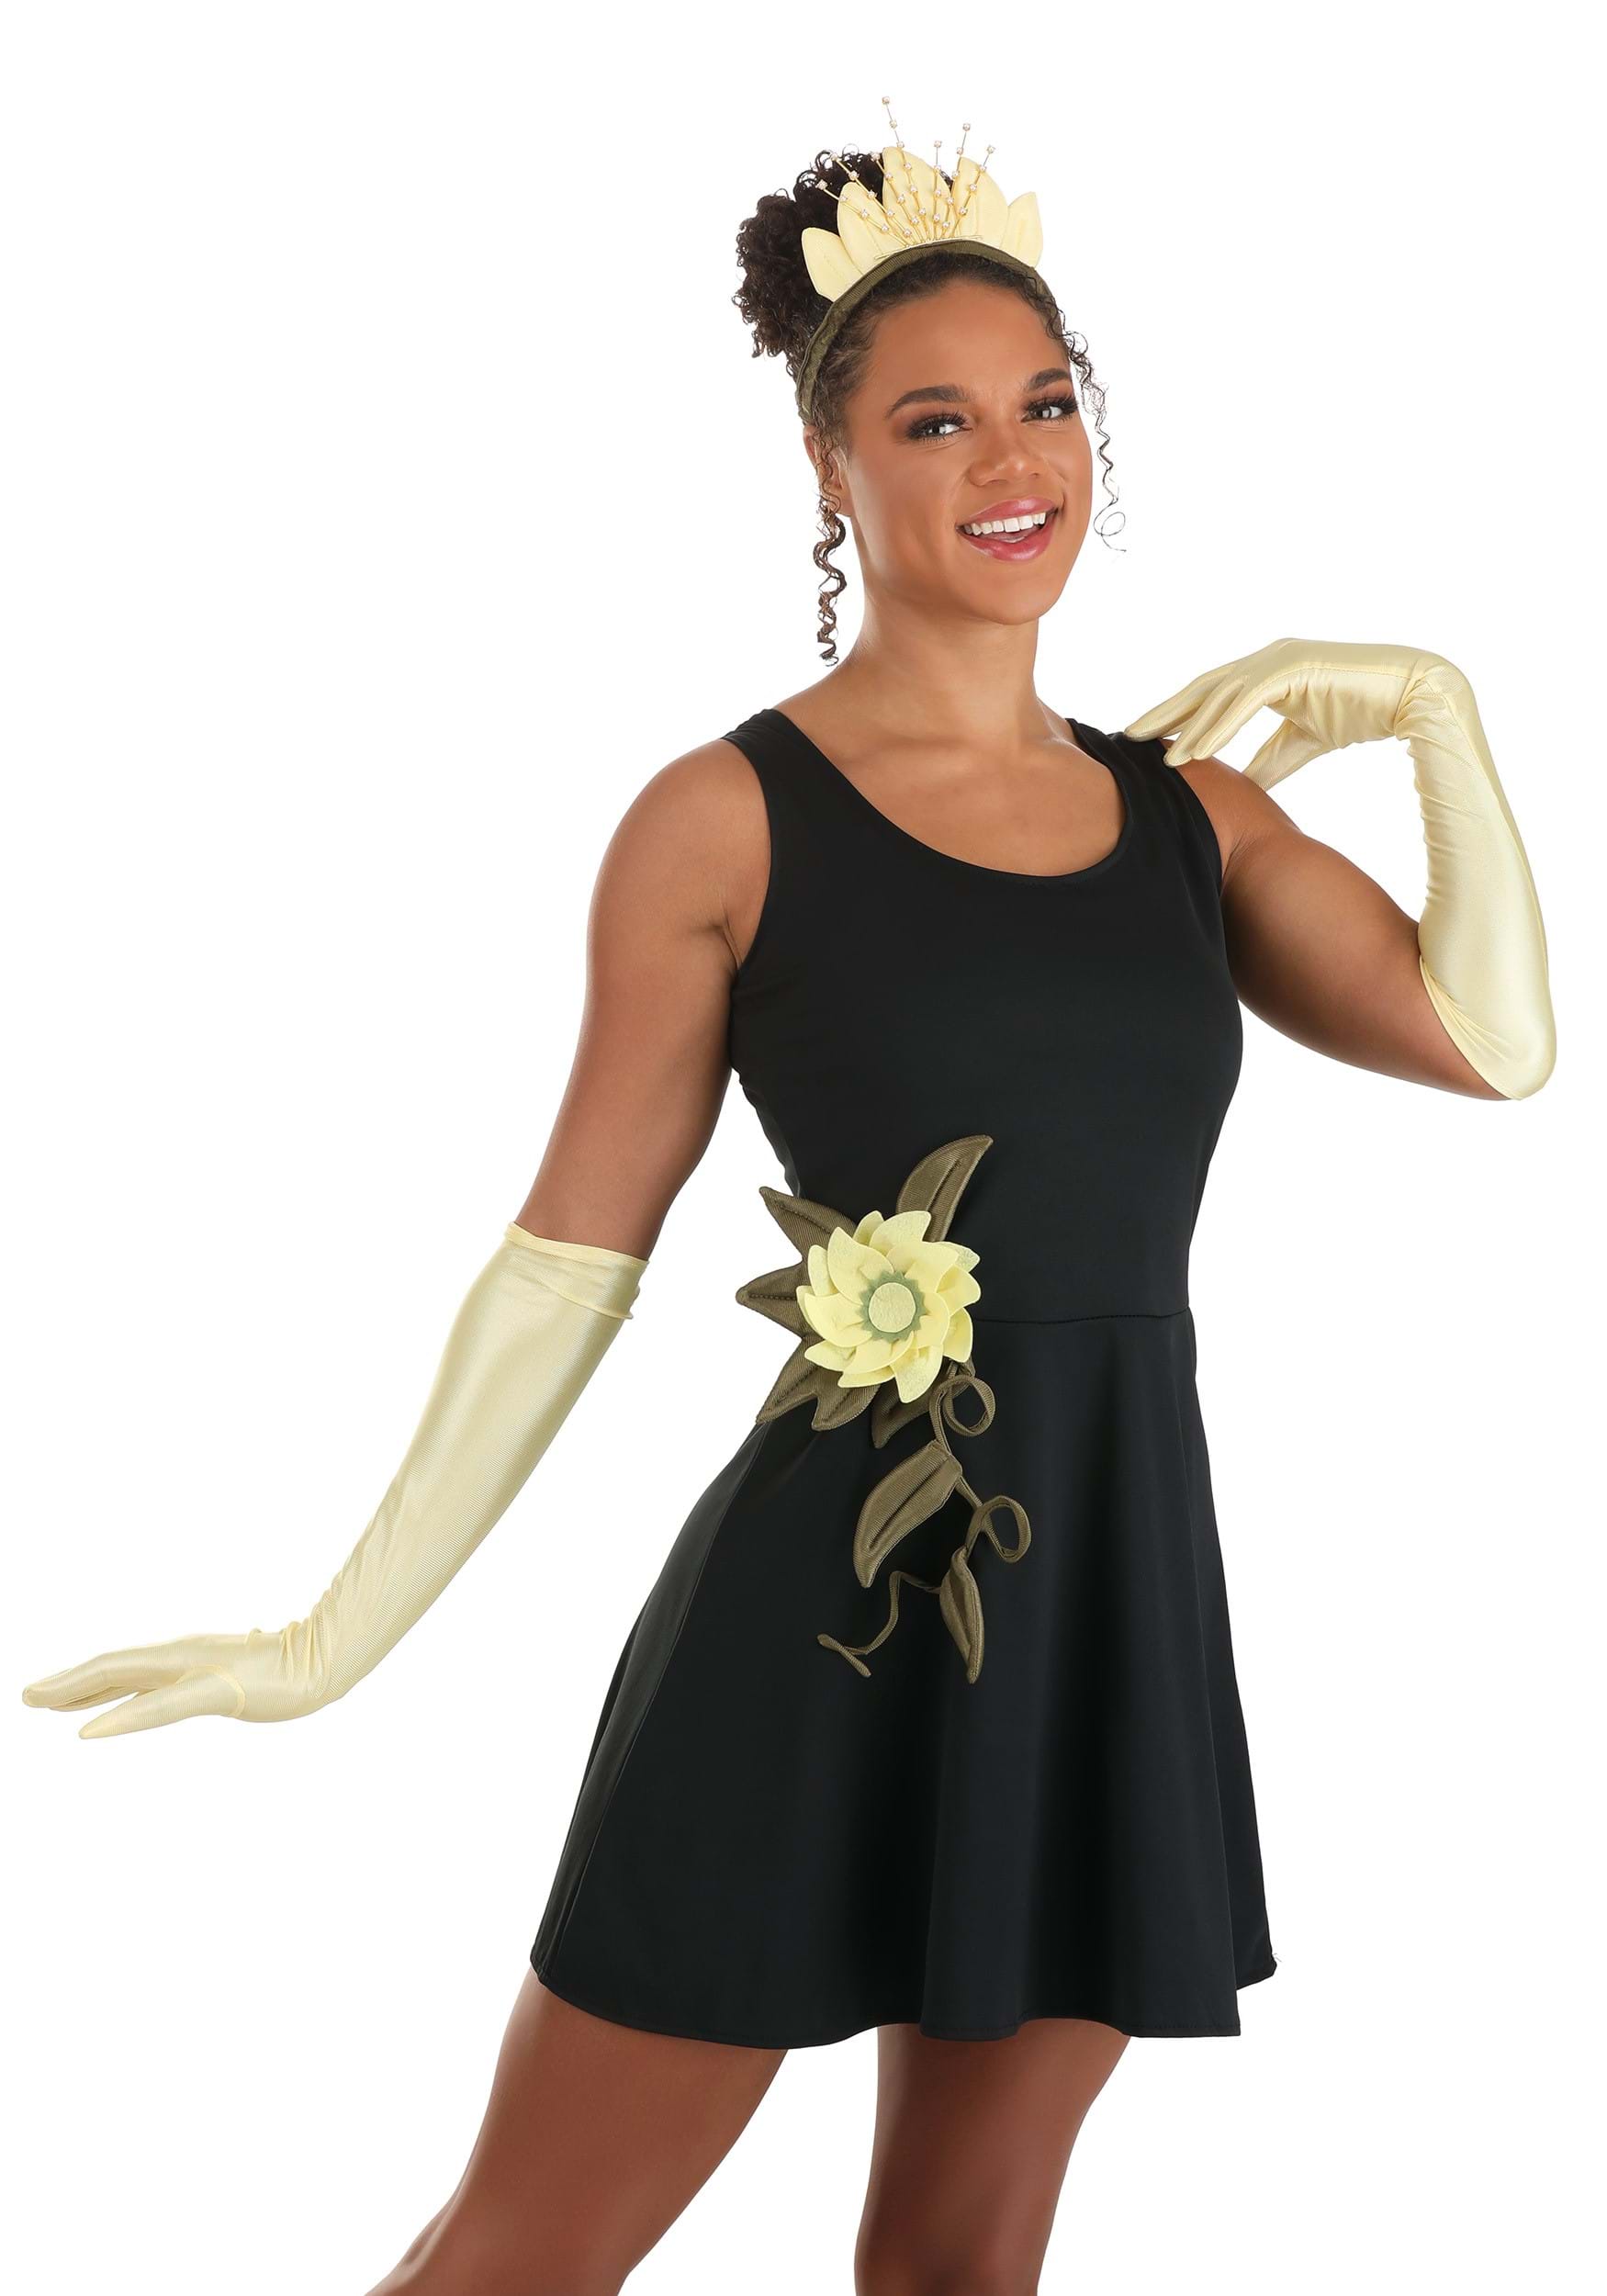 Tiana Princess and the Frog Costume Accessory Kit